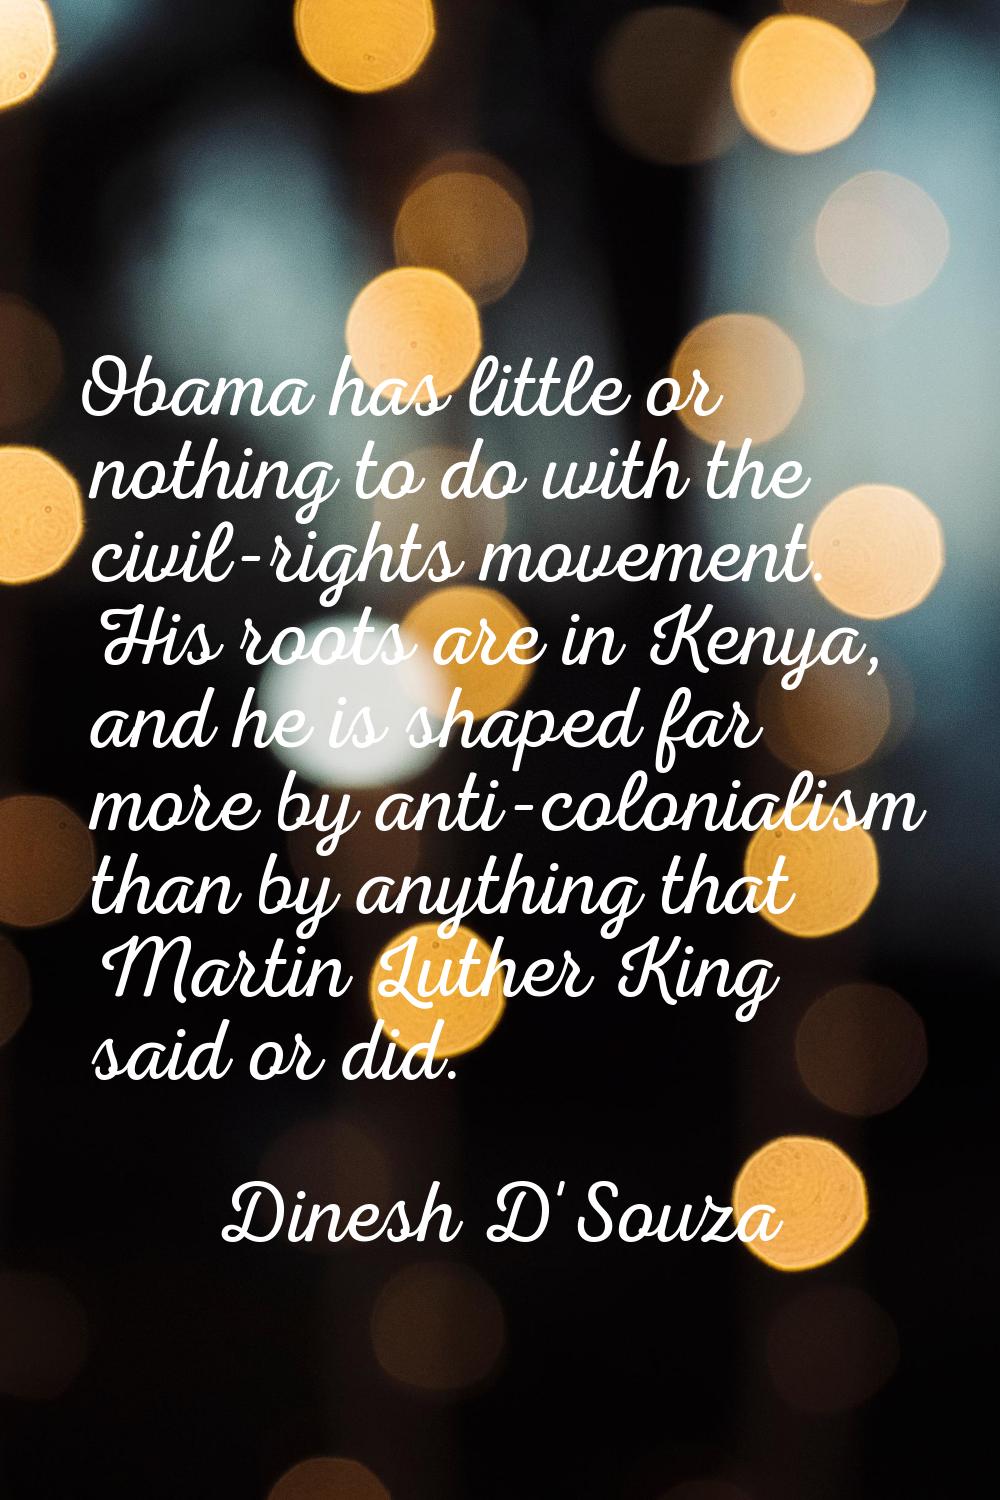 Obama has little or nothing to do with the civil-rights movement. His roots are in Kenya, and he is